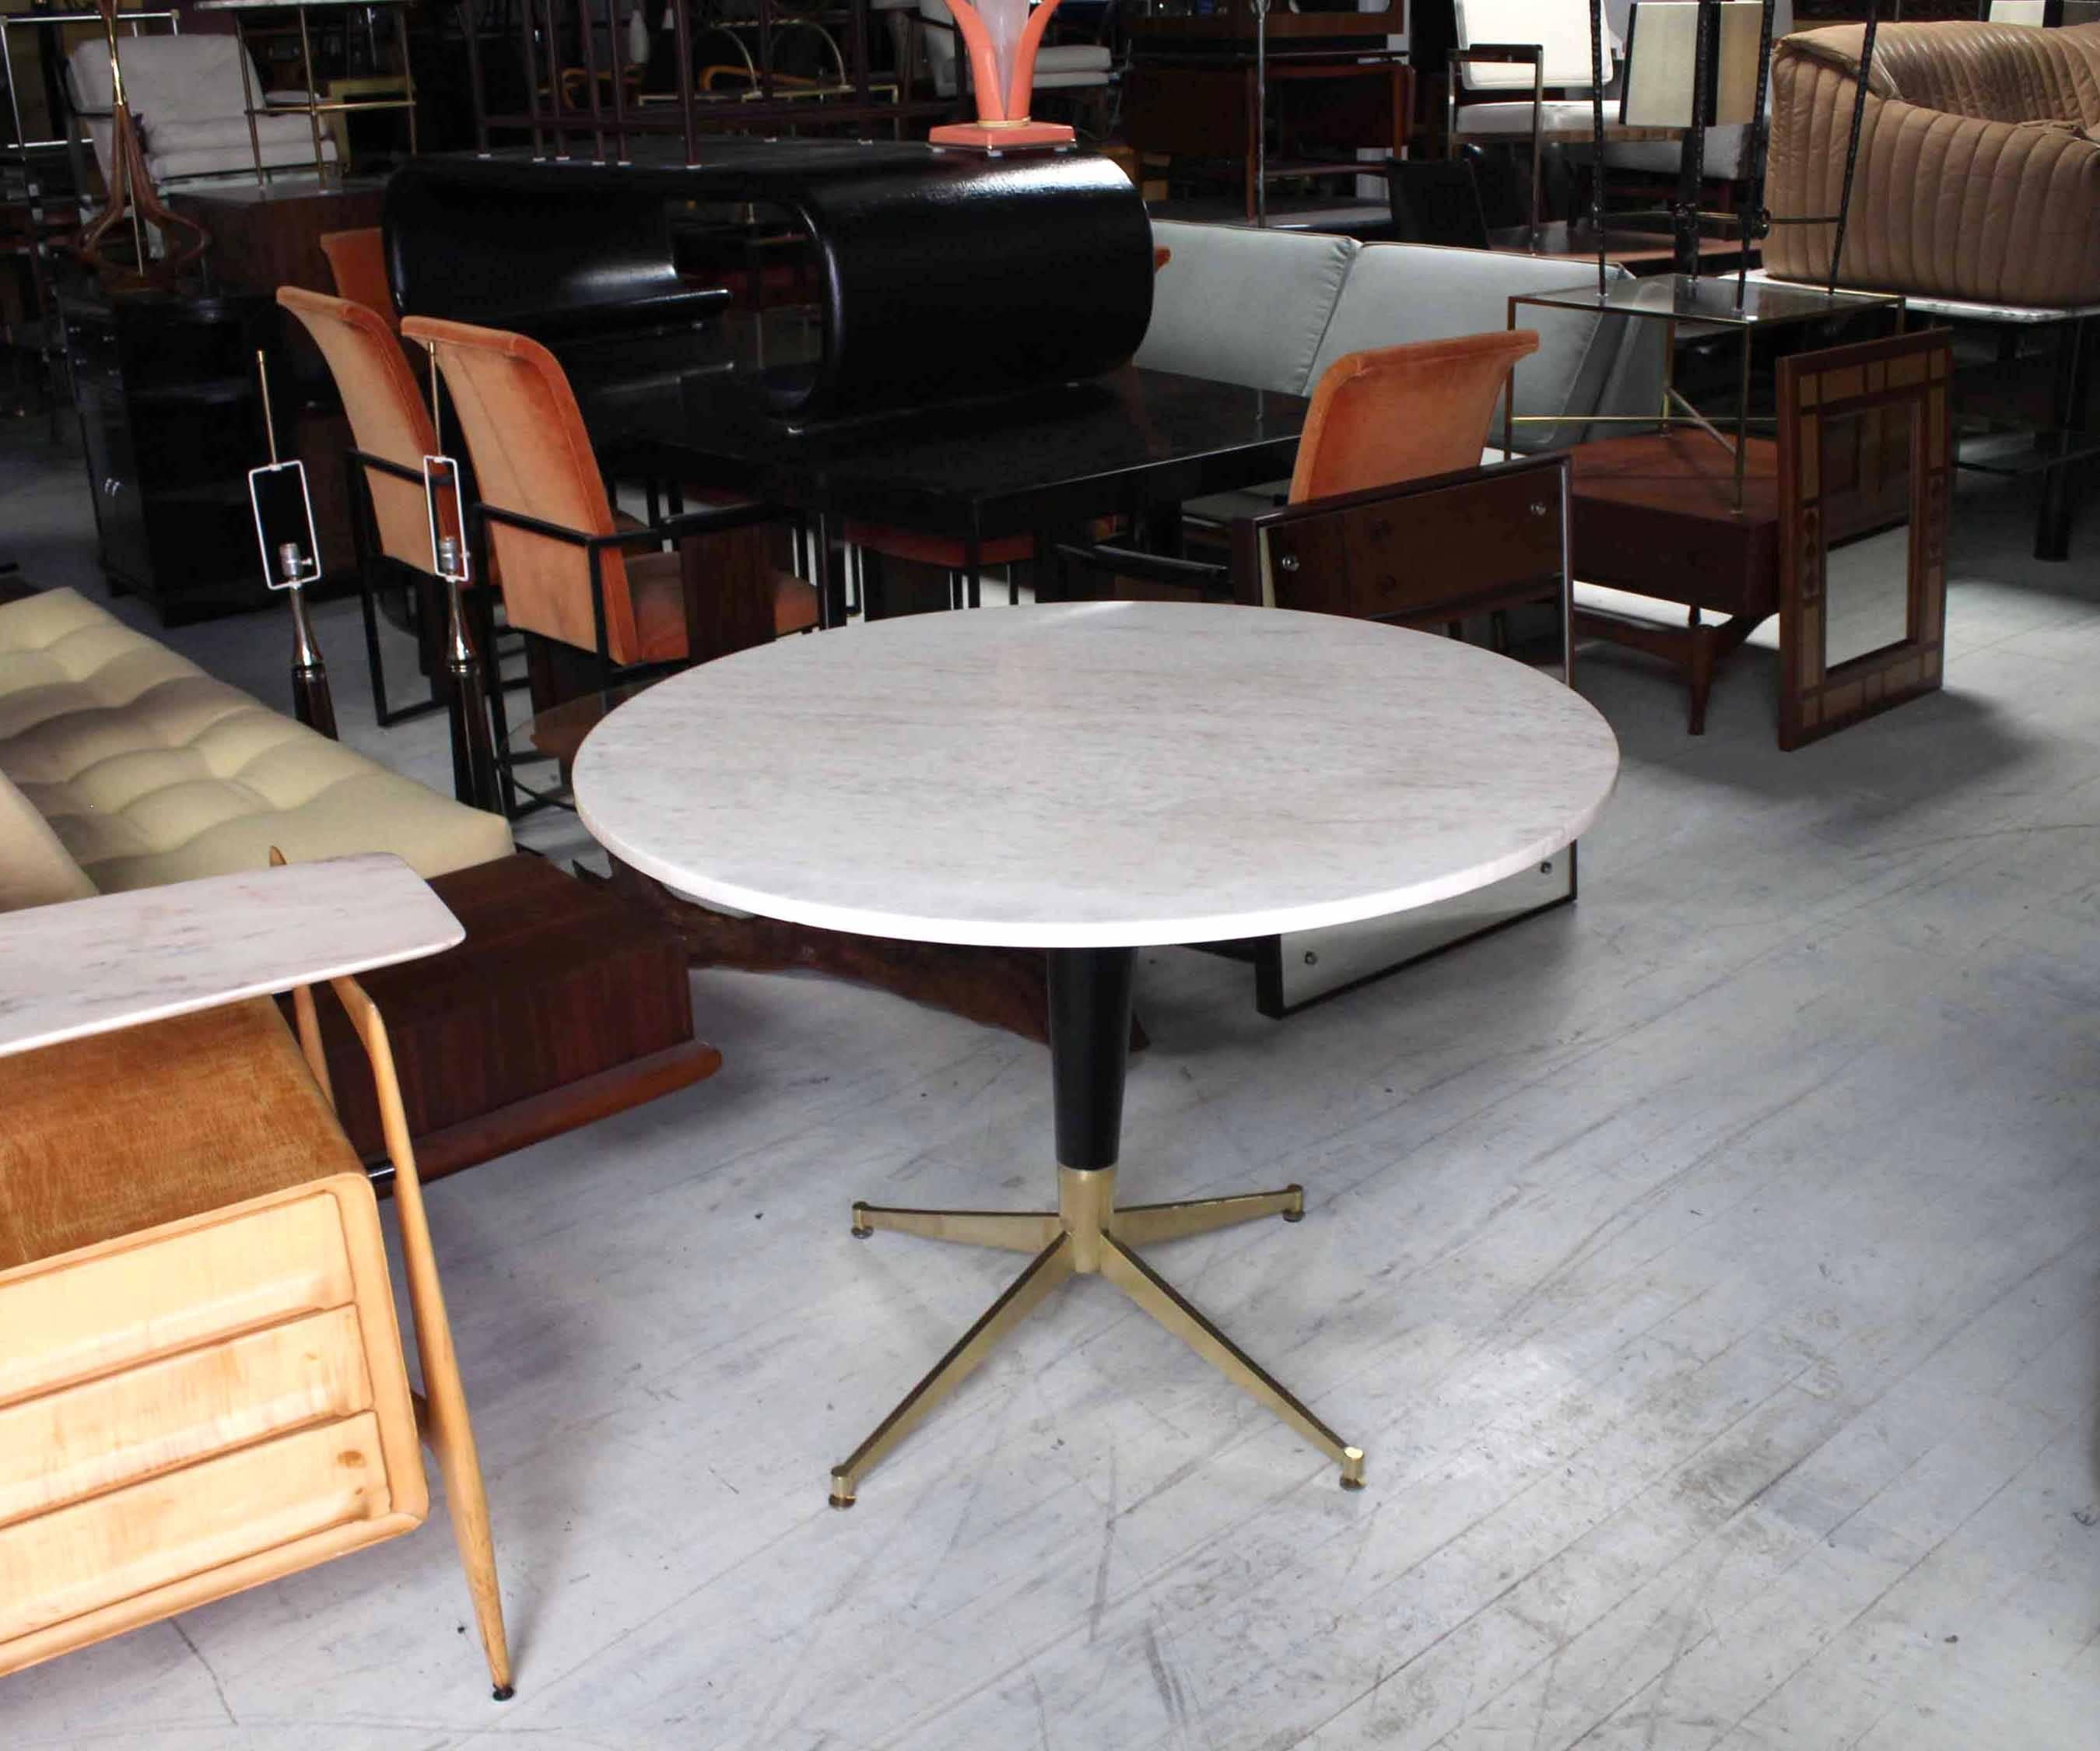 Solid brass cone shape base cafe dining dinette table with round marble top.